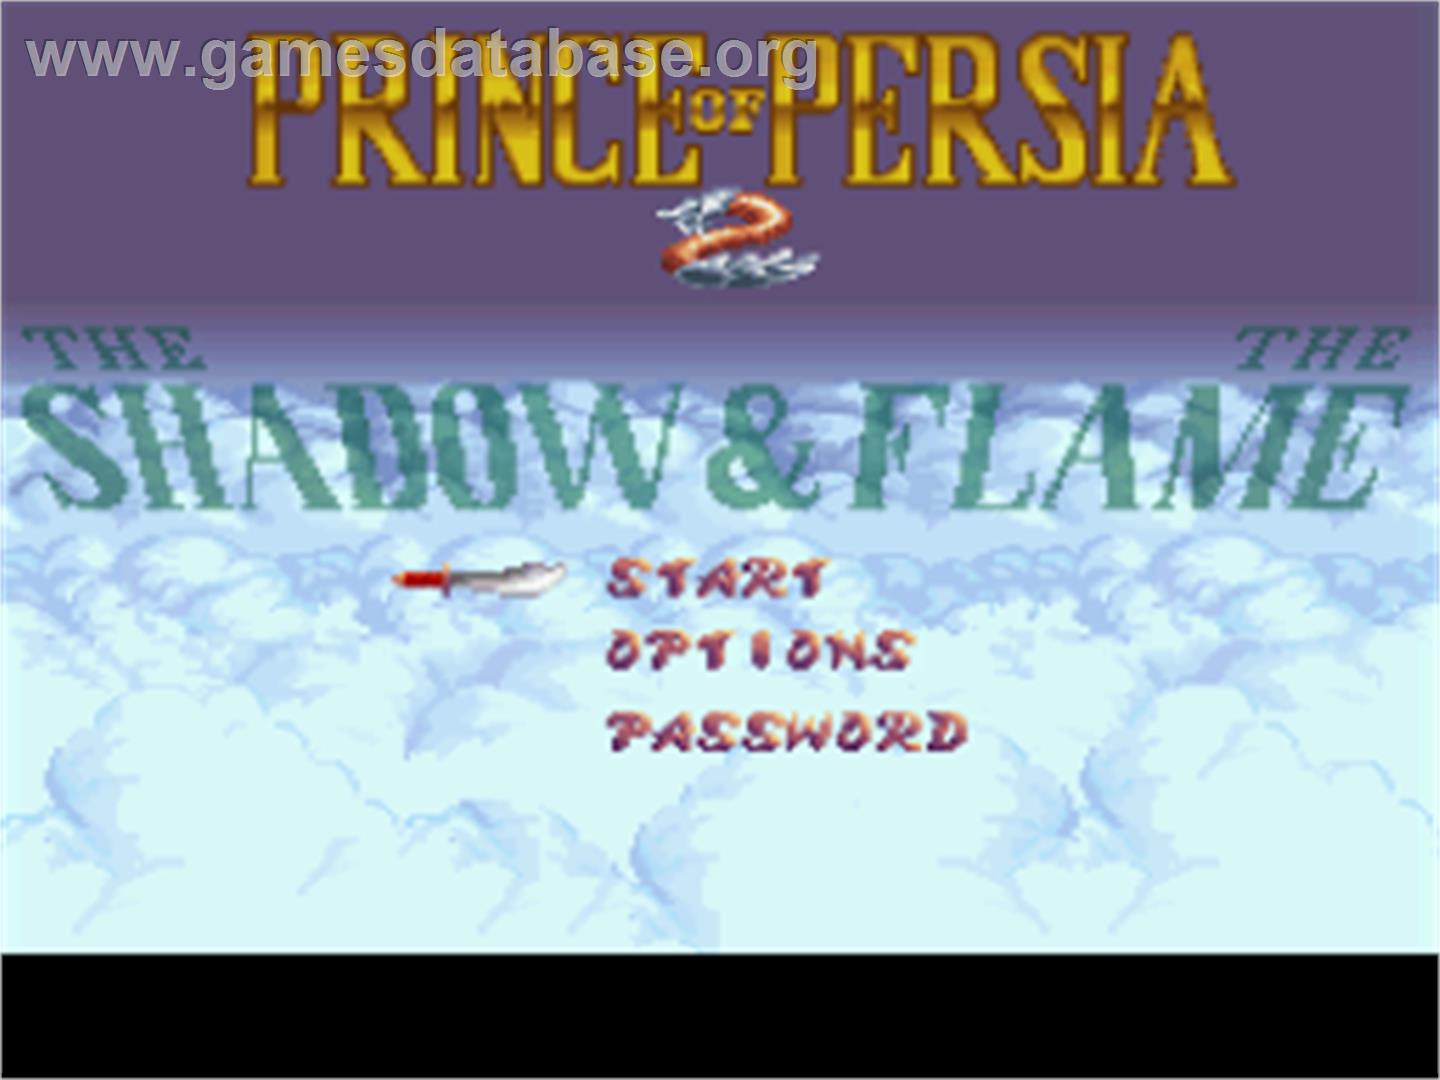 Prince of Persia 2: The Shadow & The Flame - Nintendo SNES - Artwork - Title Screen